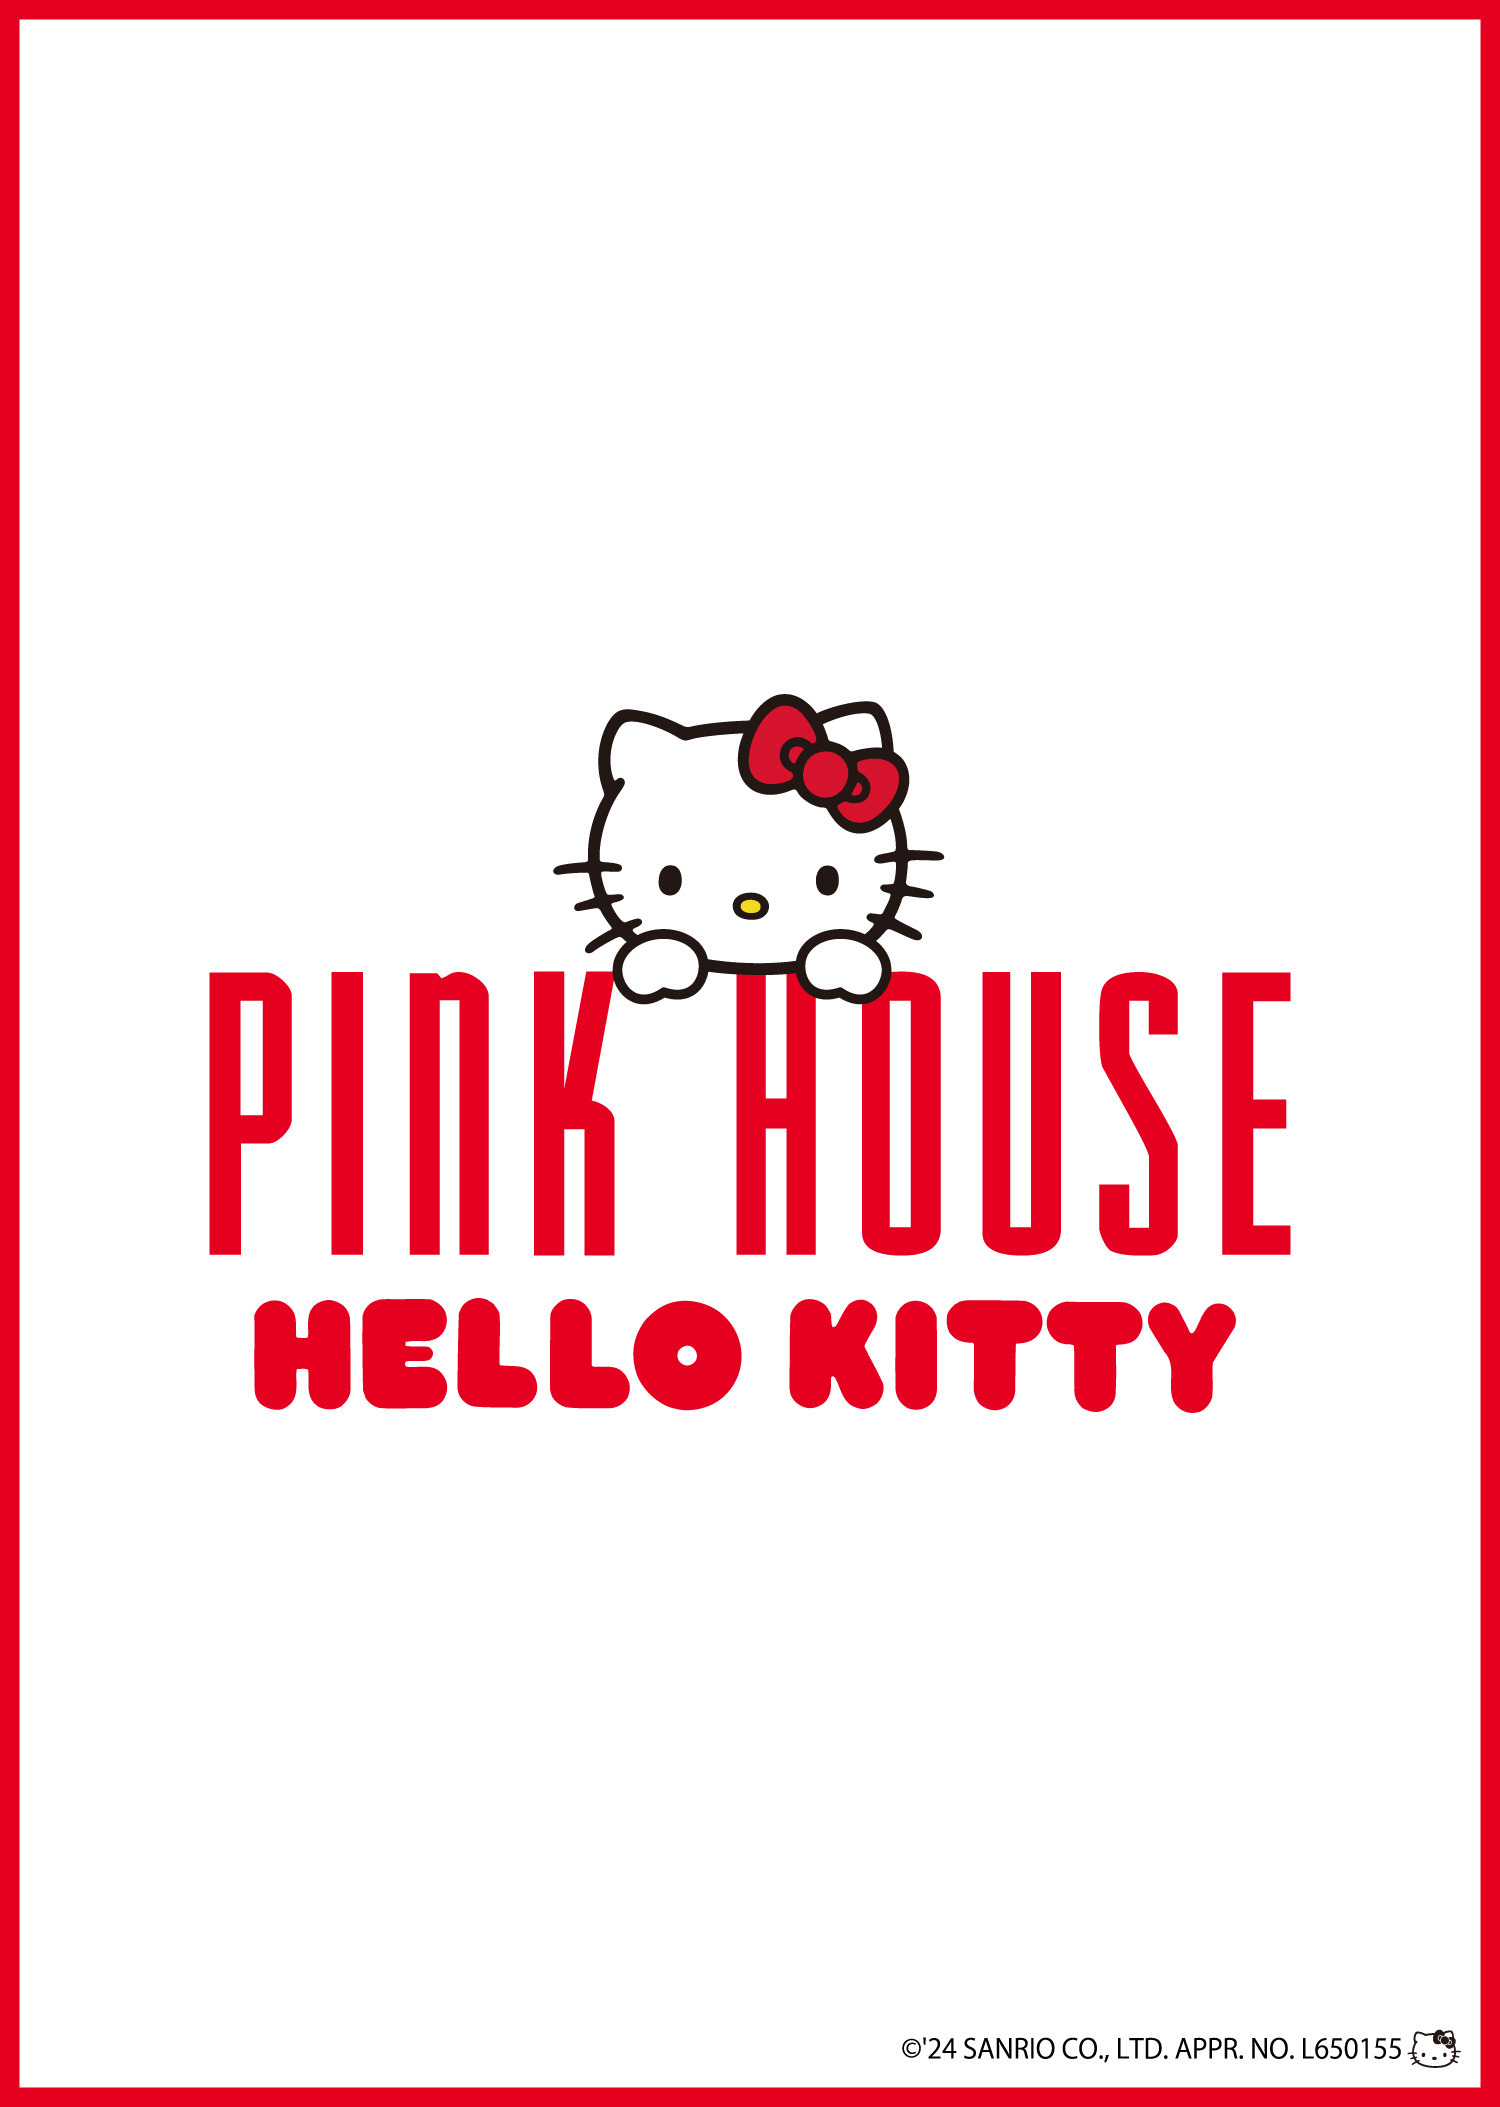 PINK HOUSE×HELLO KITTY コラボレーションアイテム発売｜ピンク ...